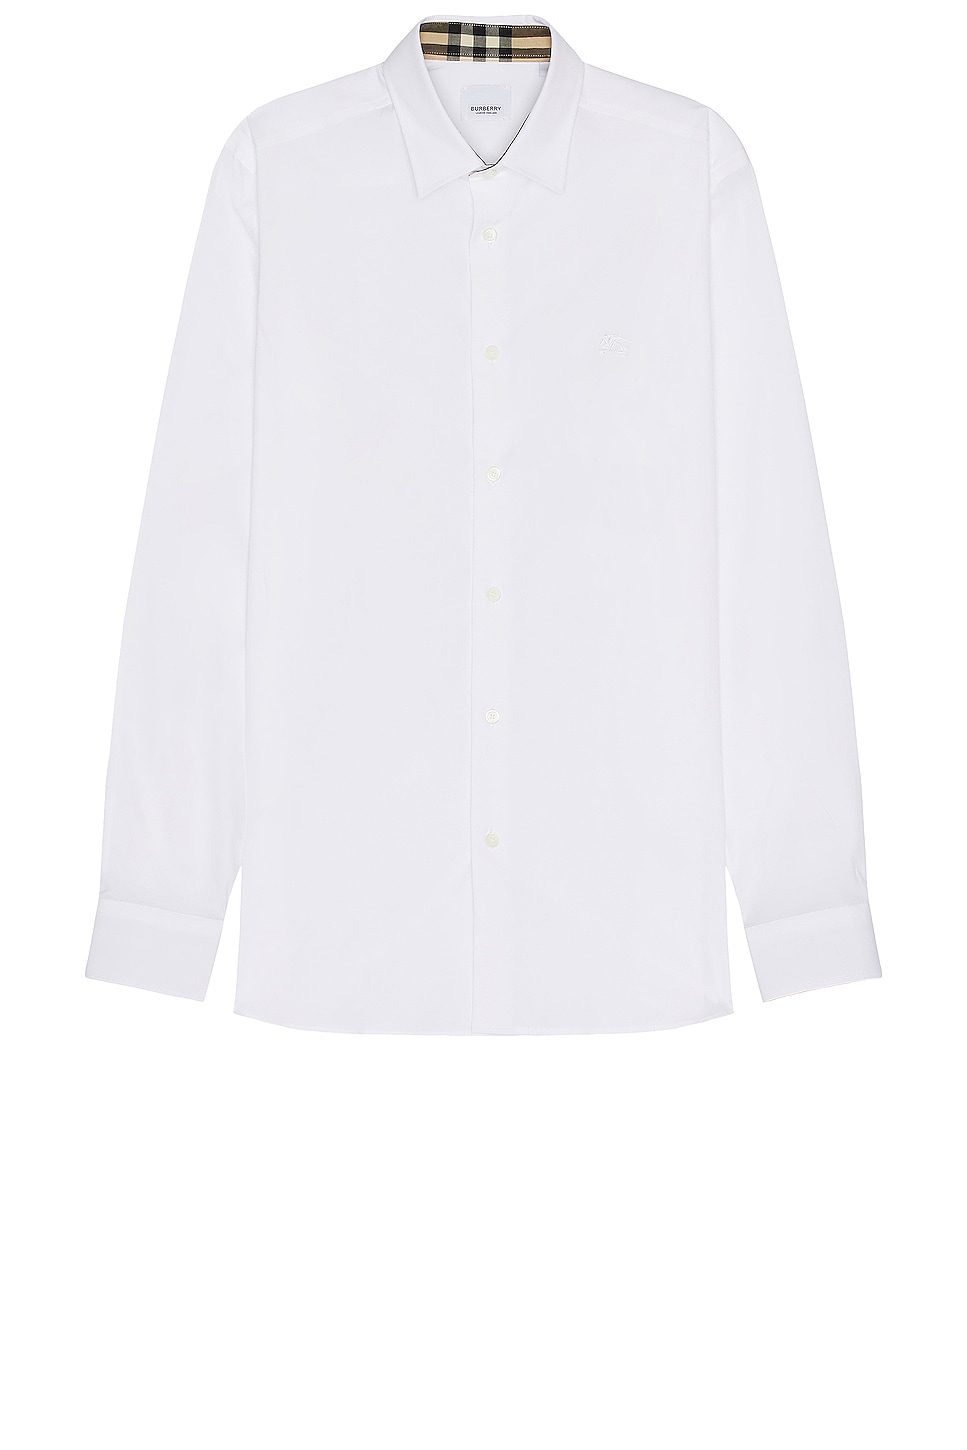 Image 1 of Burberry Sherfield Shirt in White